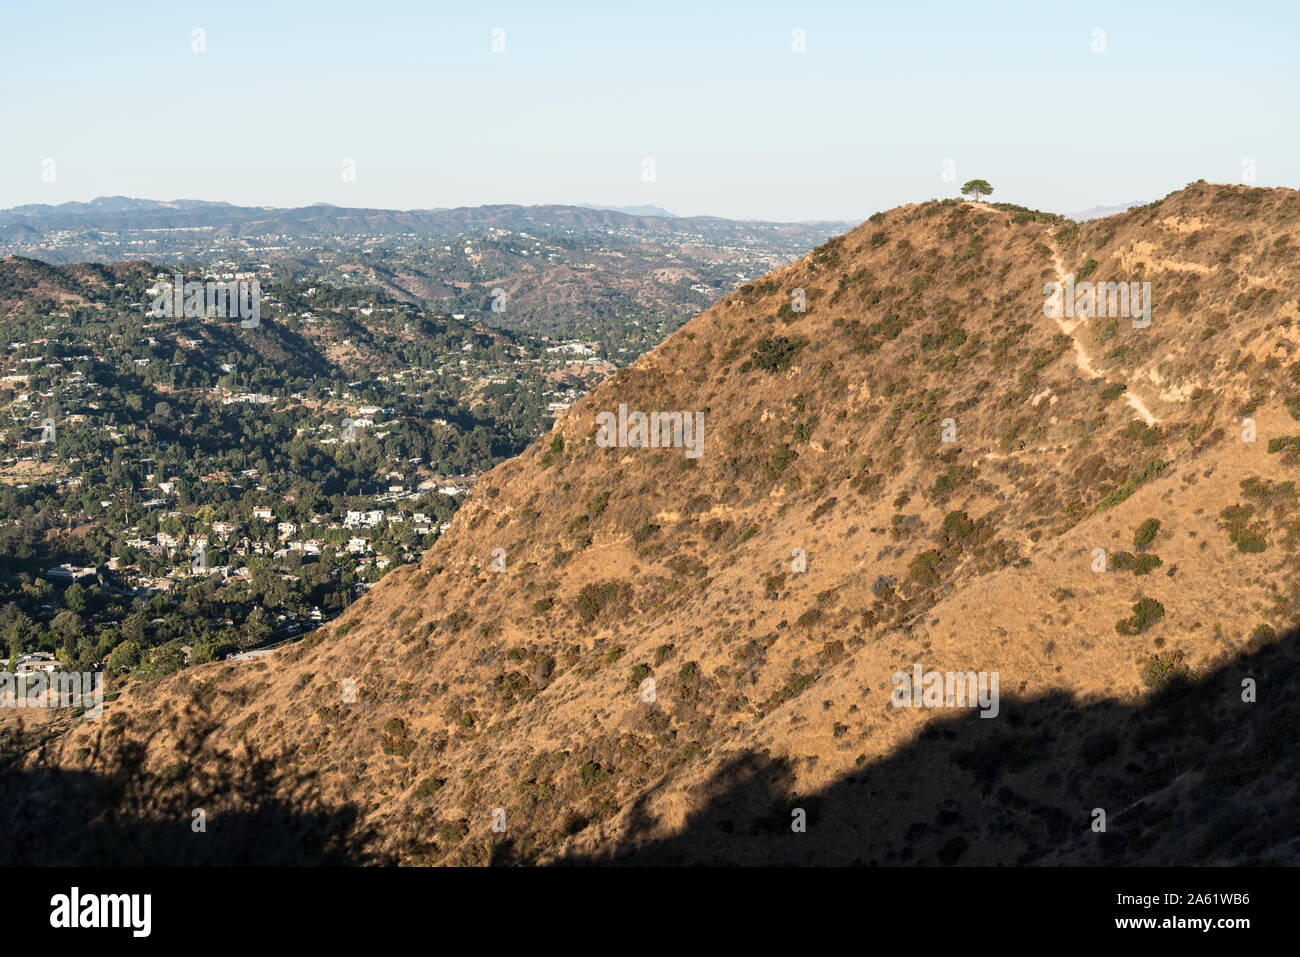 View of the Wisdom Tree Trail on Burbank Peak near Griffith Park in Los Angeles, California. Stock Photo